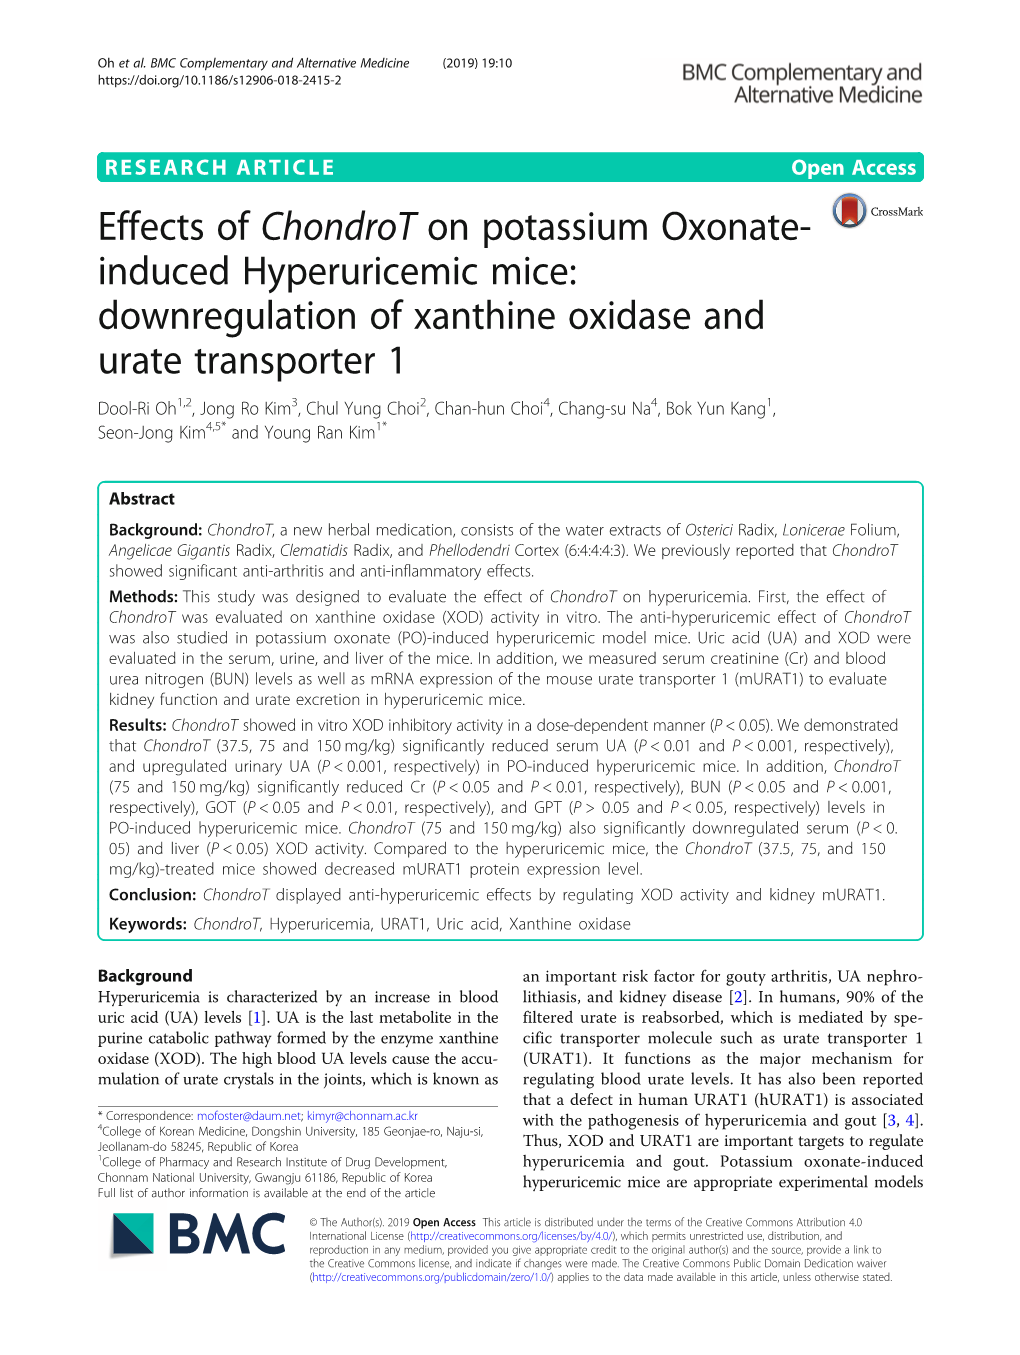 Effects of Chondrot on Potassium Oxonate-Induced Hyperuricemic Mice